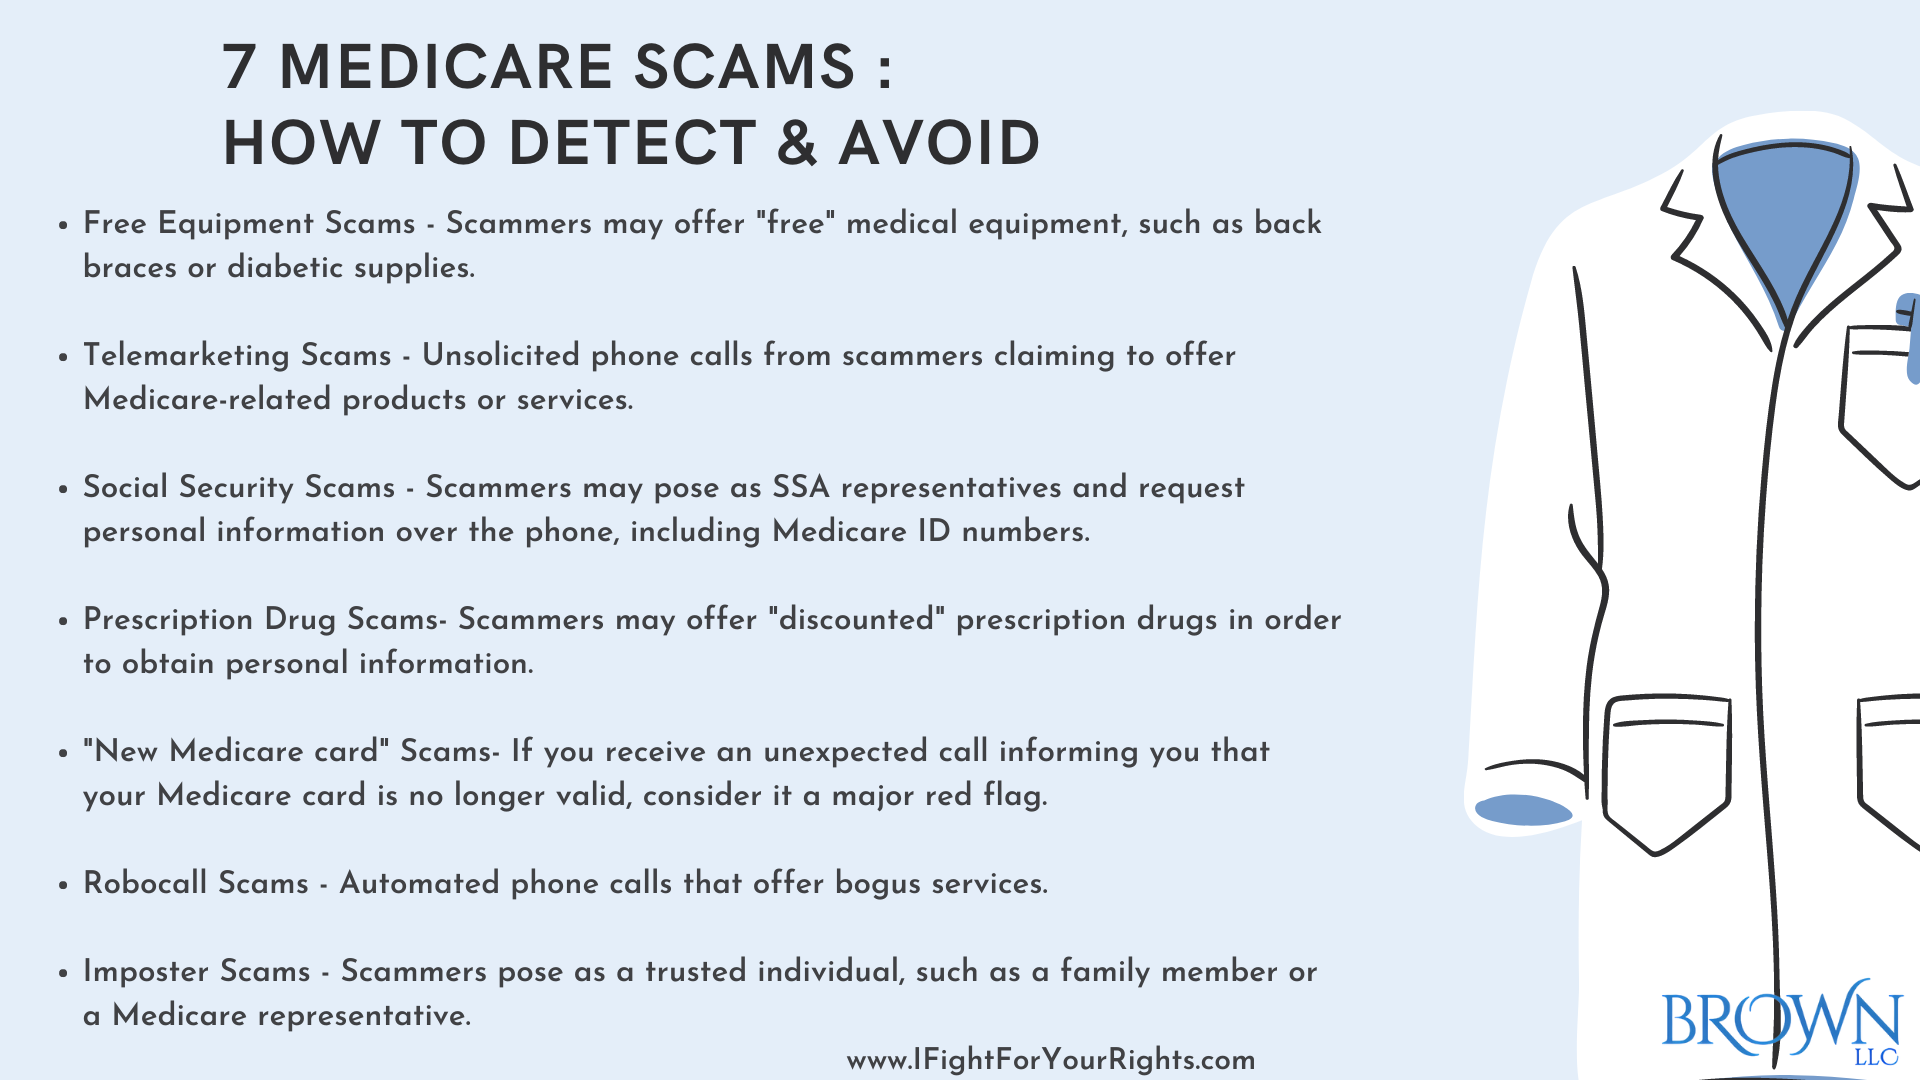 7 Medicare Scams How to Detect and Avoid Brown, LLC